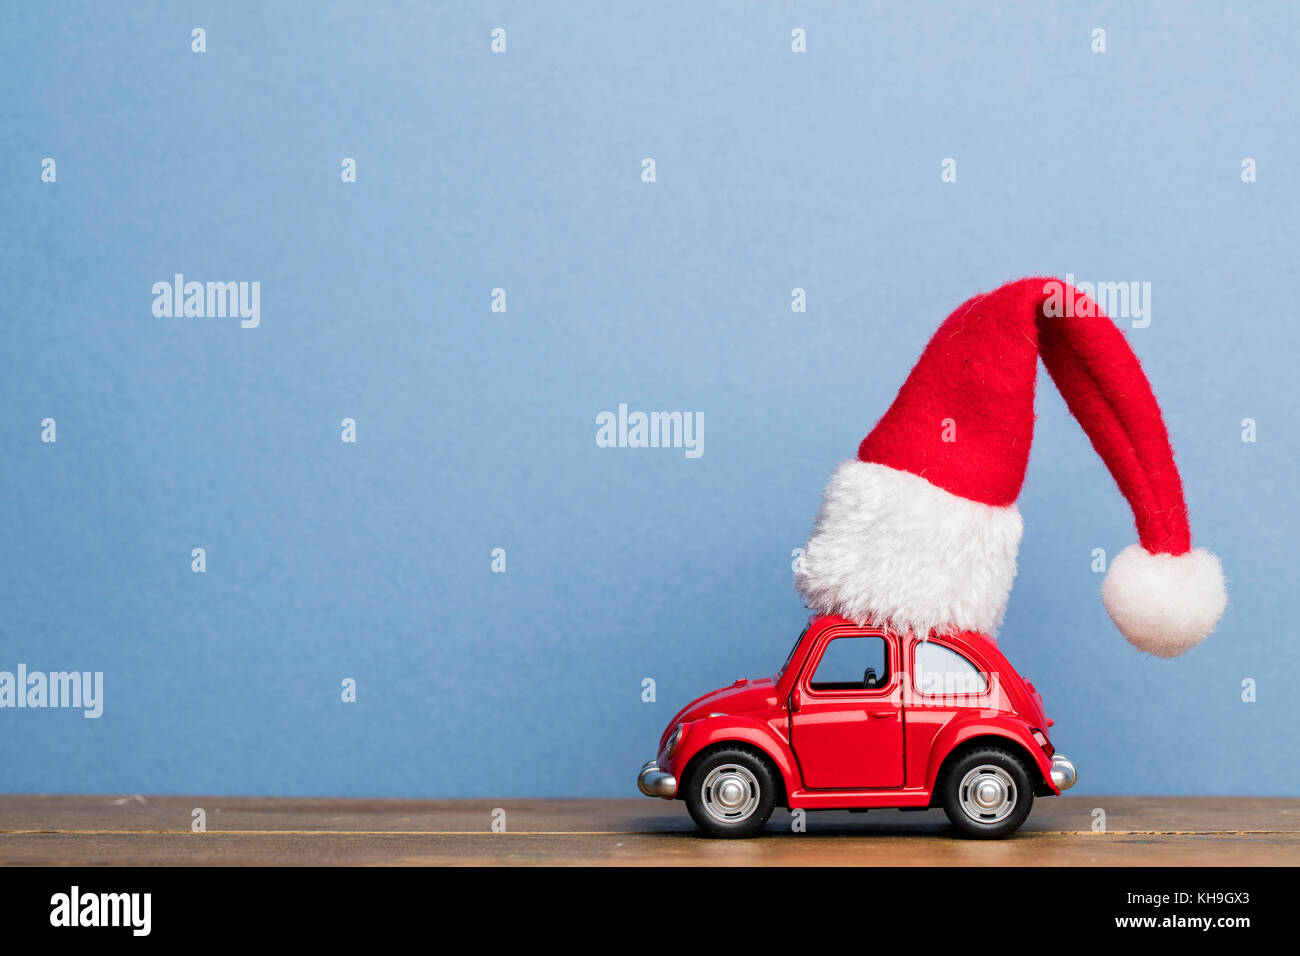 LONDON, UK - DECEMBER 15th 2016: Christmas background concept with red toy car aginst blue background Stock Photo